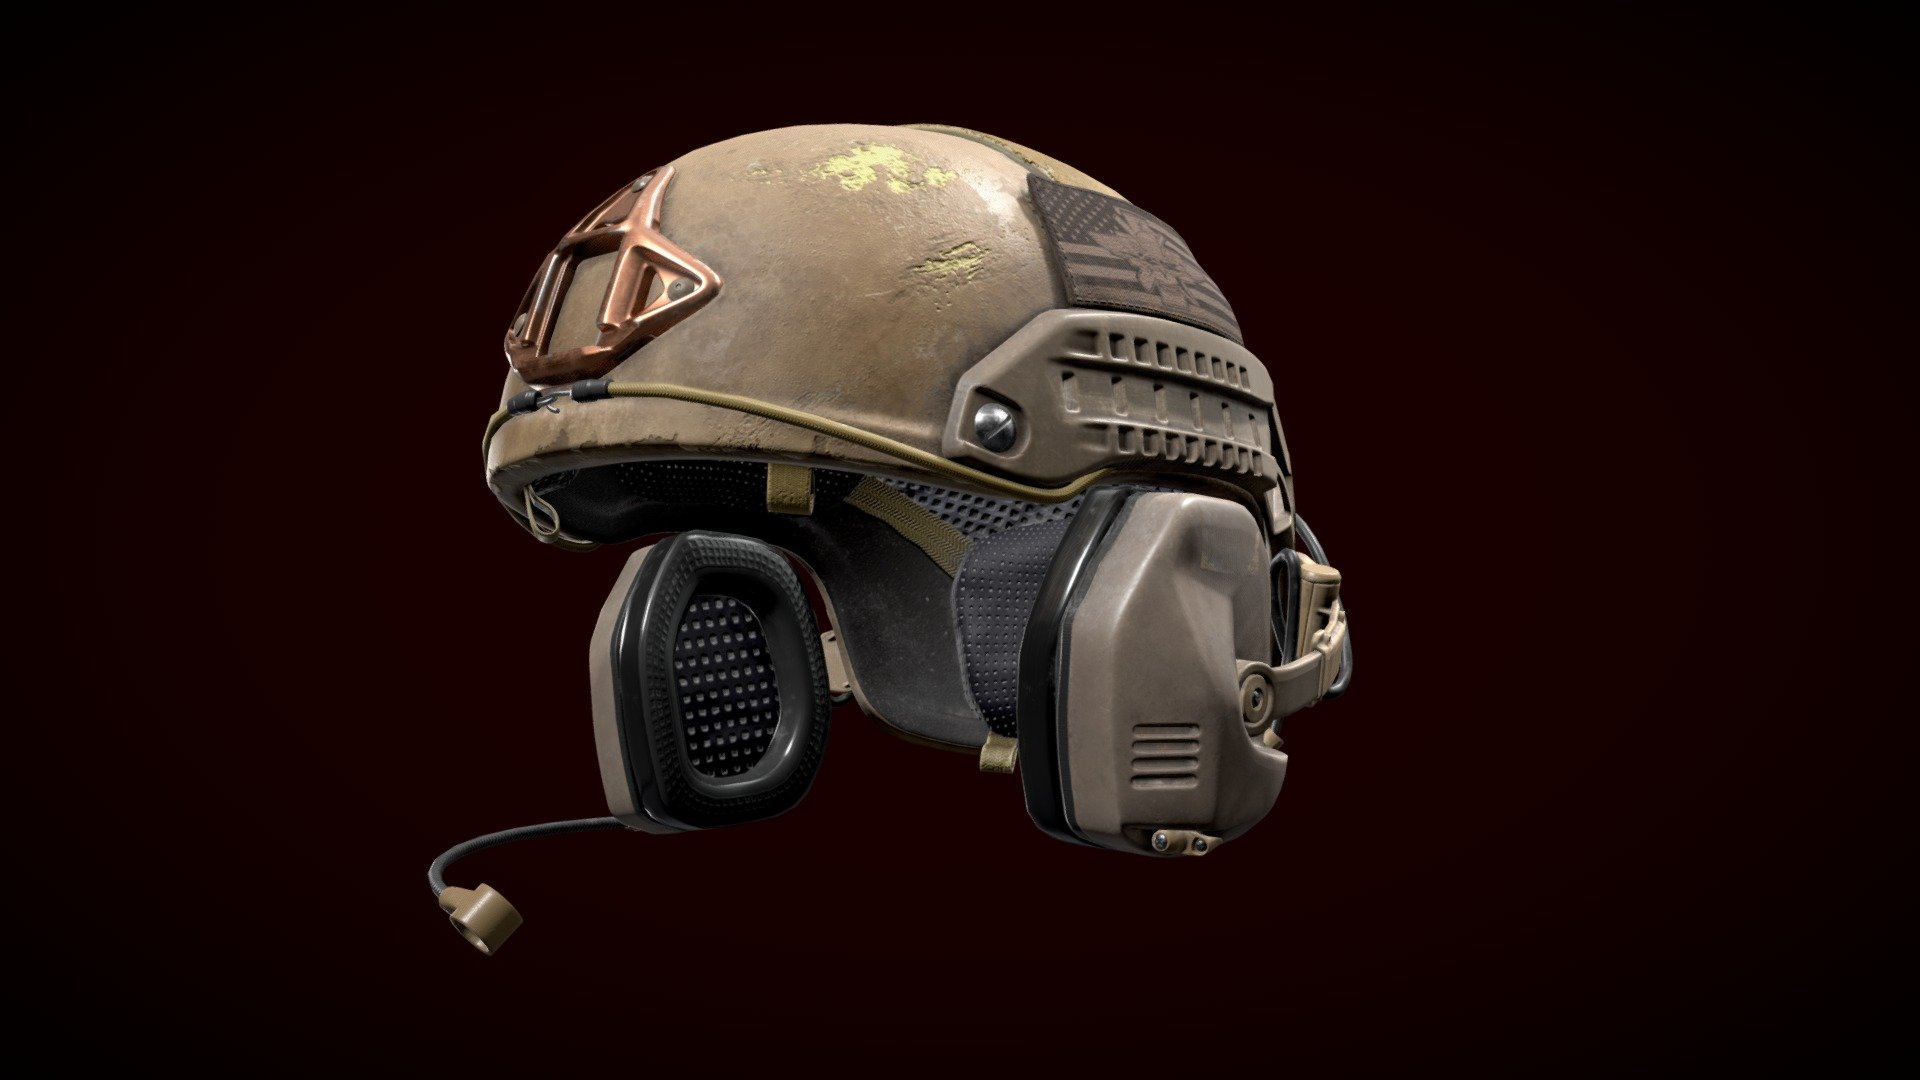 Military helmet with tactical headset made at Digital Arts and Entertainment for the course Game Asset Pipeline. Modeled in 3dsMax and Zbrush, textured in Substance Painter 3d model